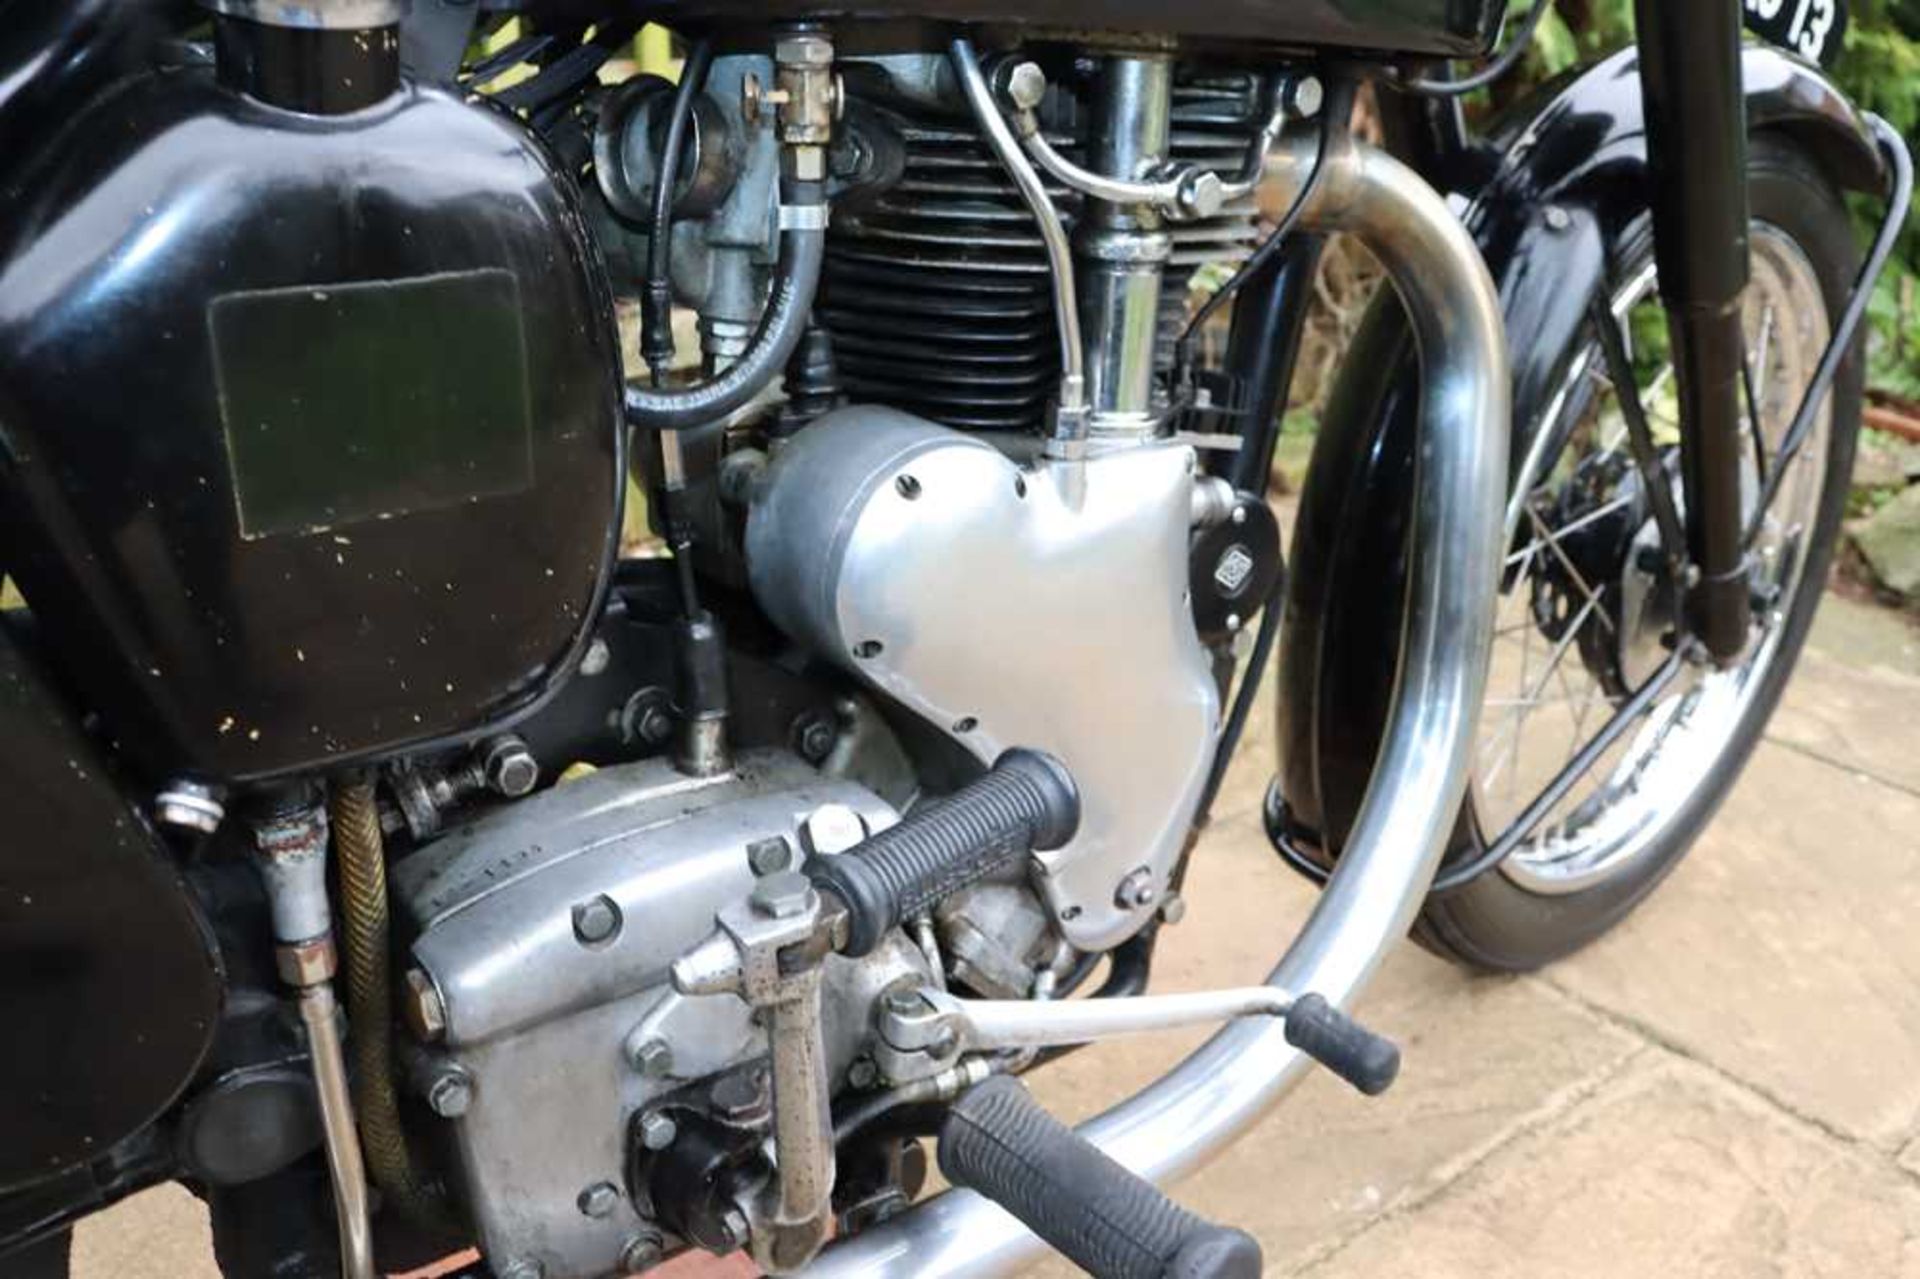 1954 Velocette MSS Fitted with an Alton electric starter kit - Image 27 of 41